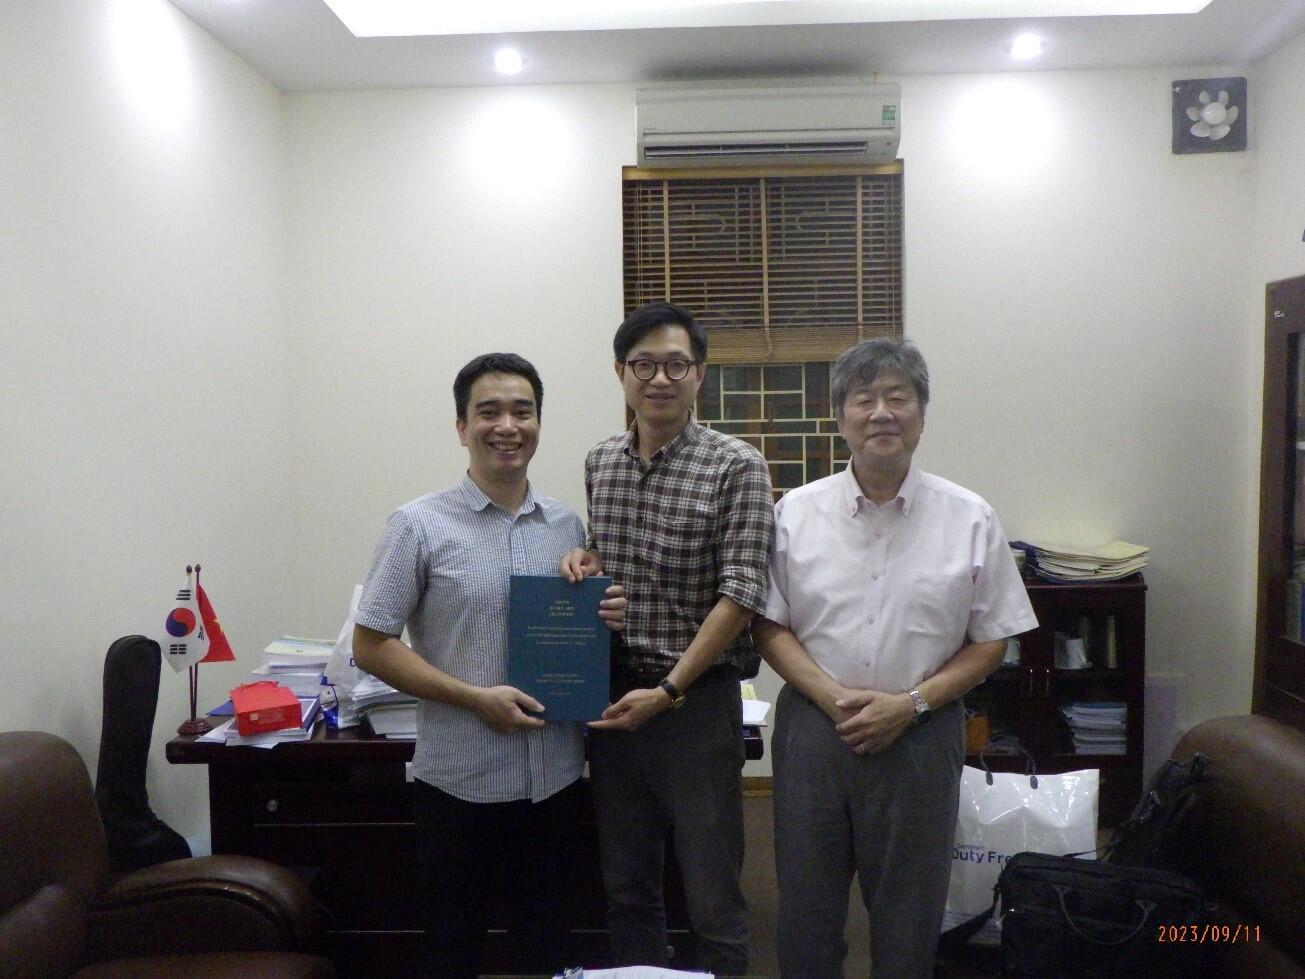 Donation of PhD thesis: Vice Head of Faculty of Civil Engineering, UTC, Dr. Nguyen Xuan Tung and Dr. Nguyen Anh Duc, Prof. Dosho Yasuhiro